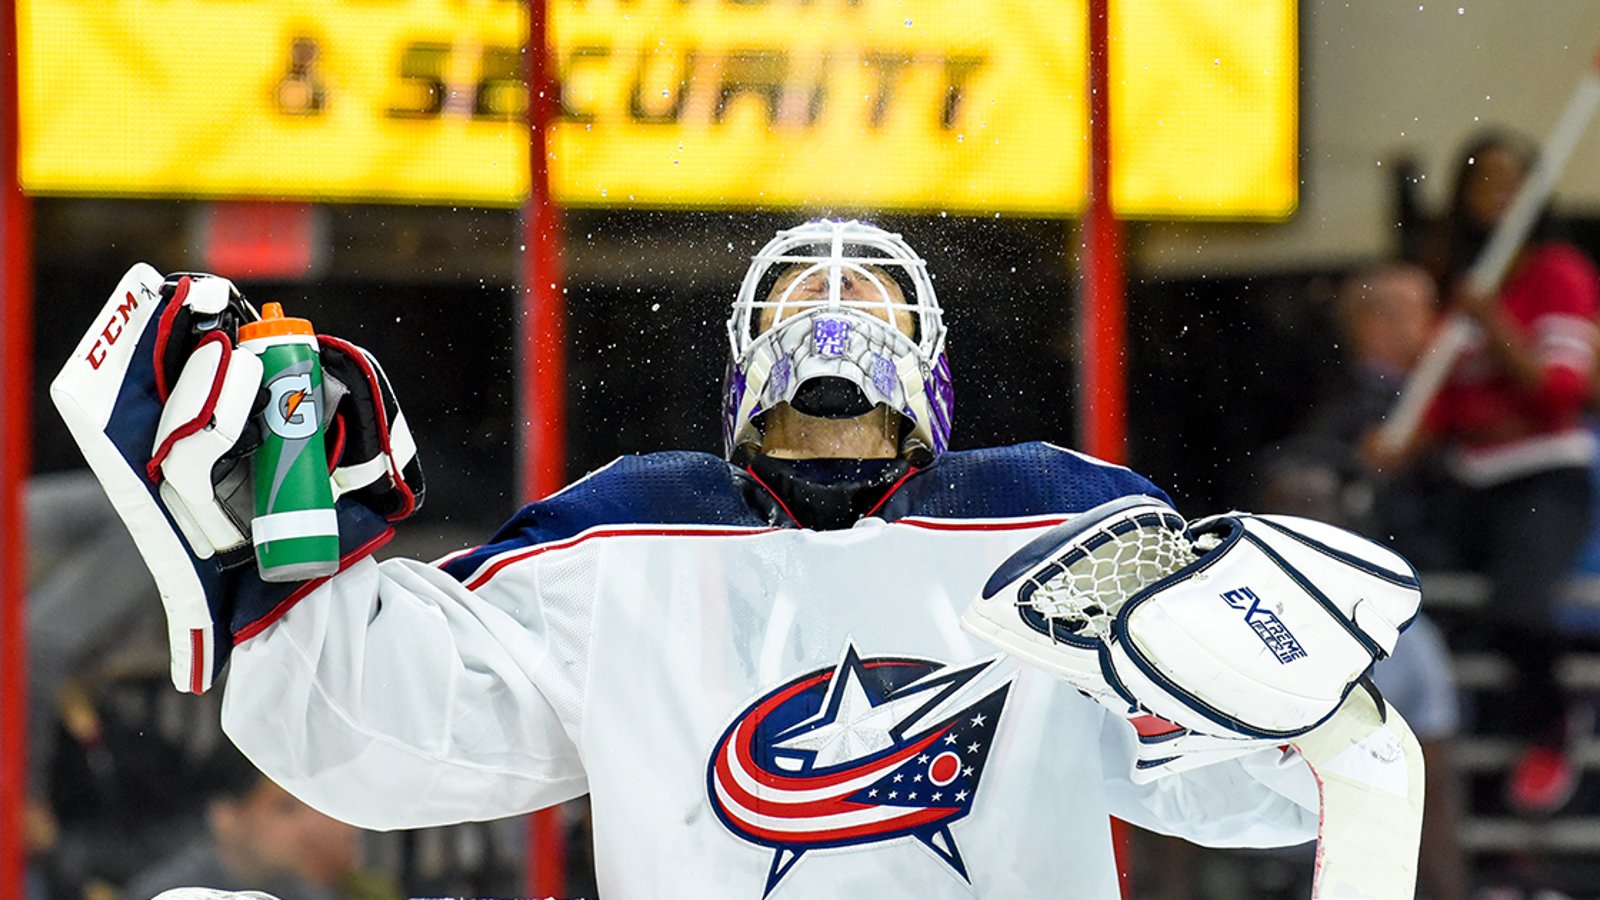 ICYMI: Bobrovsky has agreed to waive his no trade clause